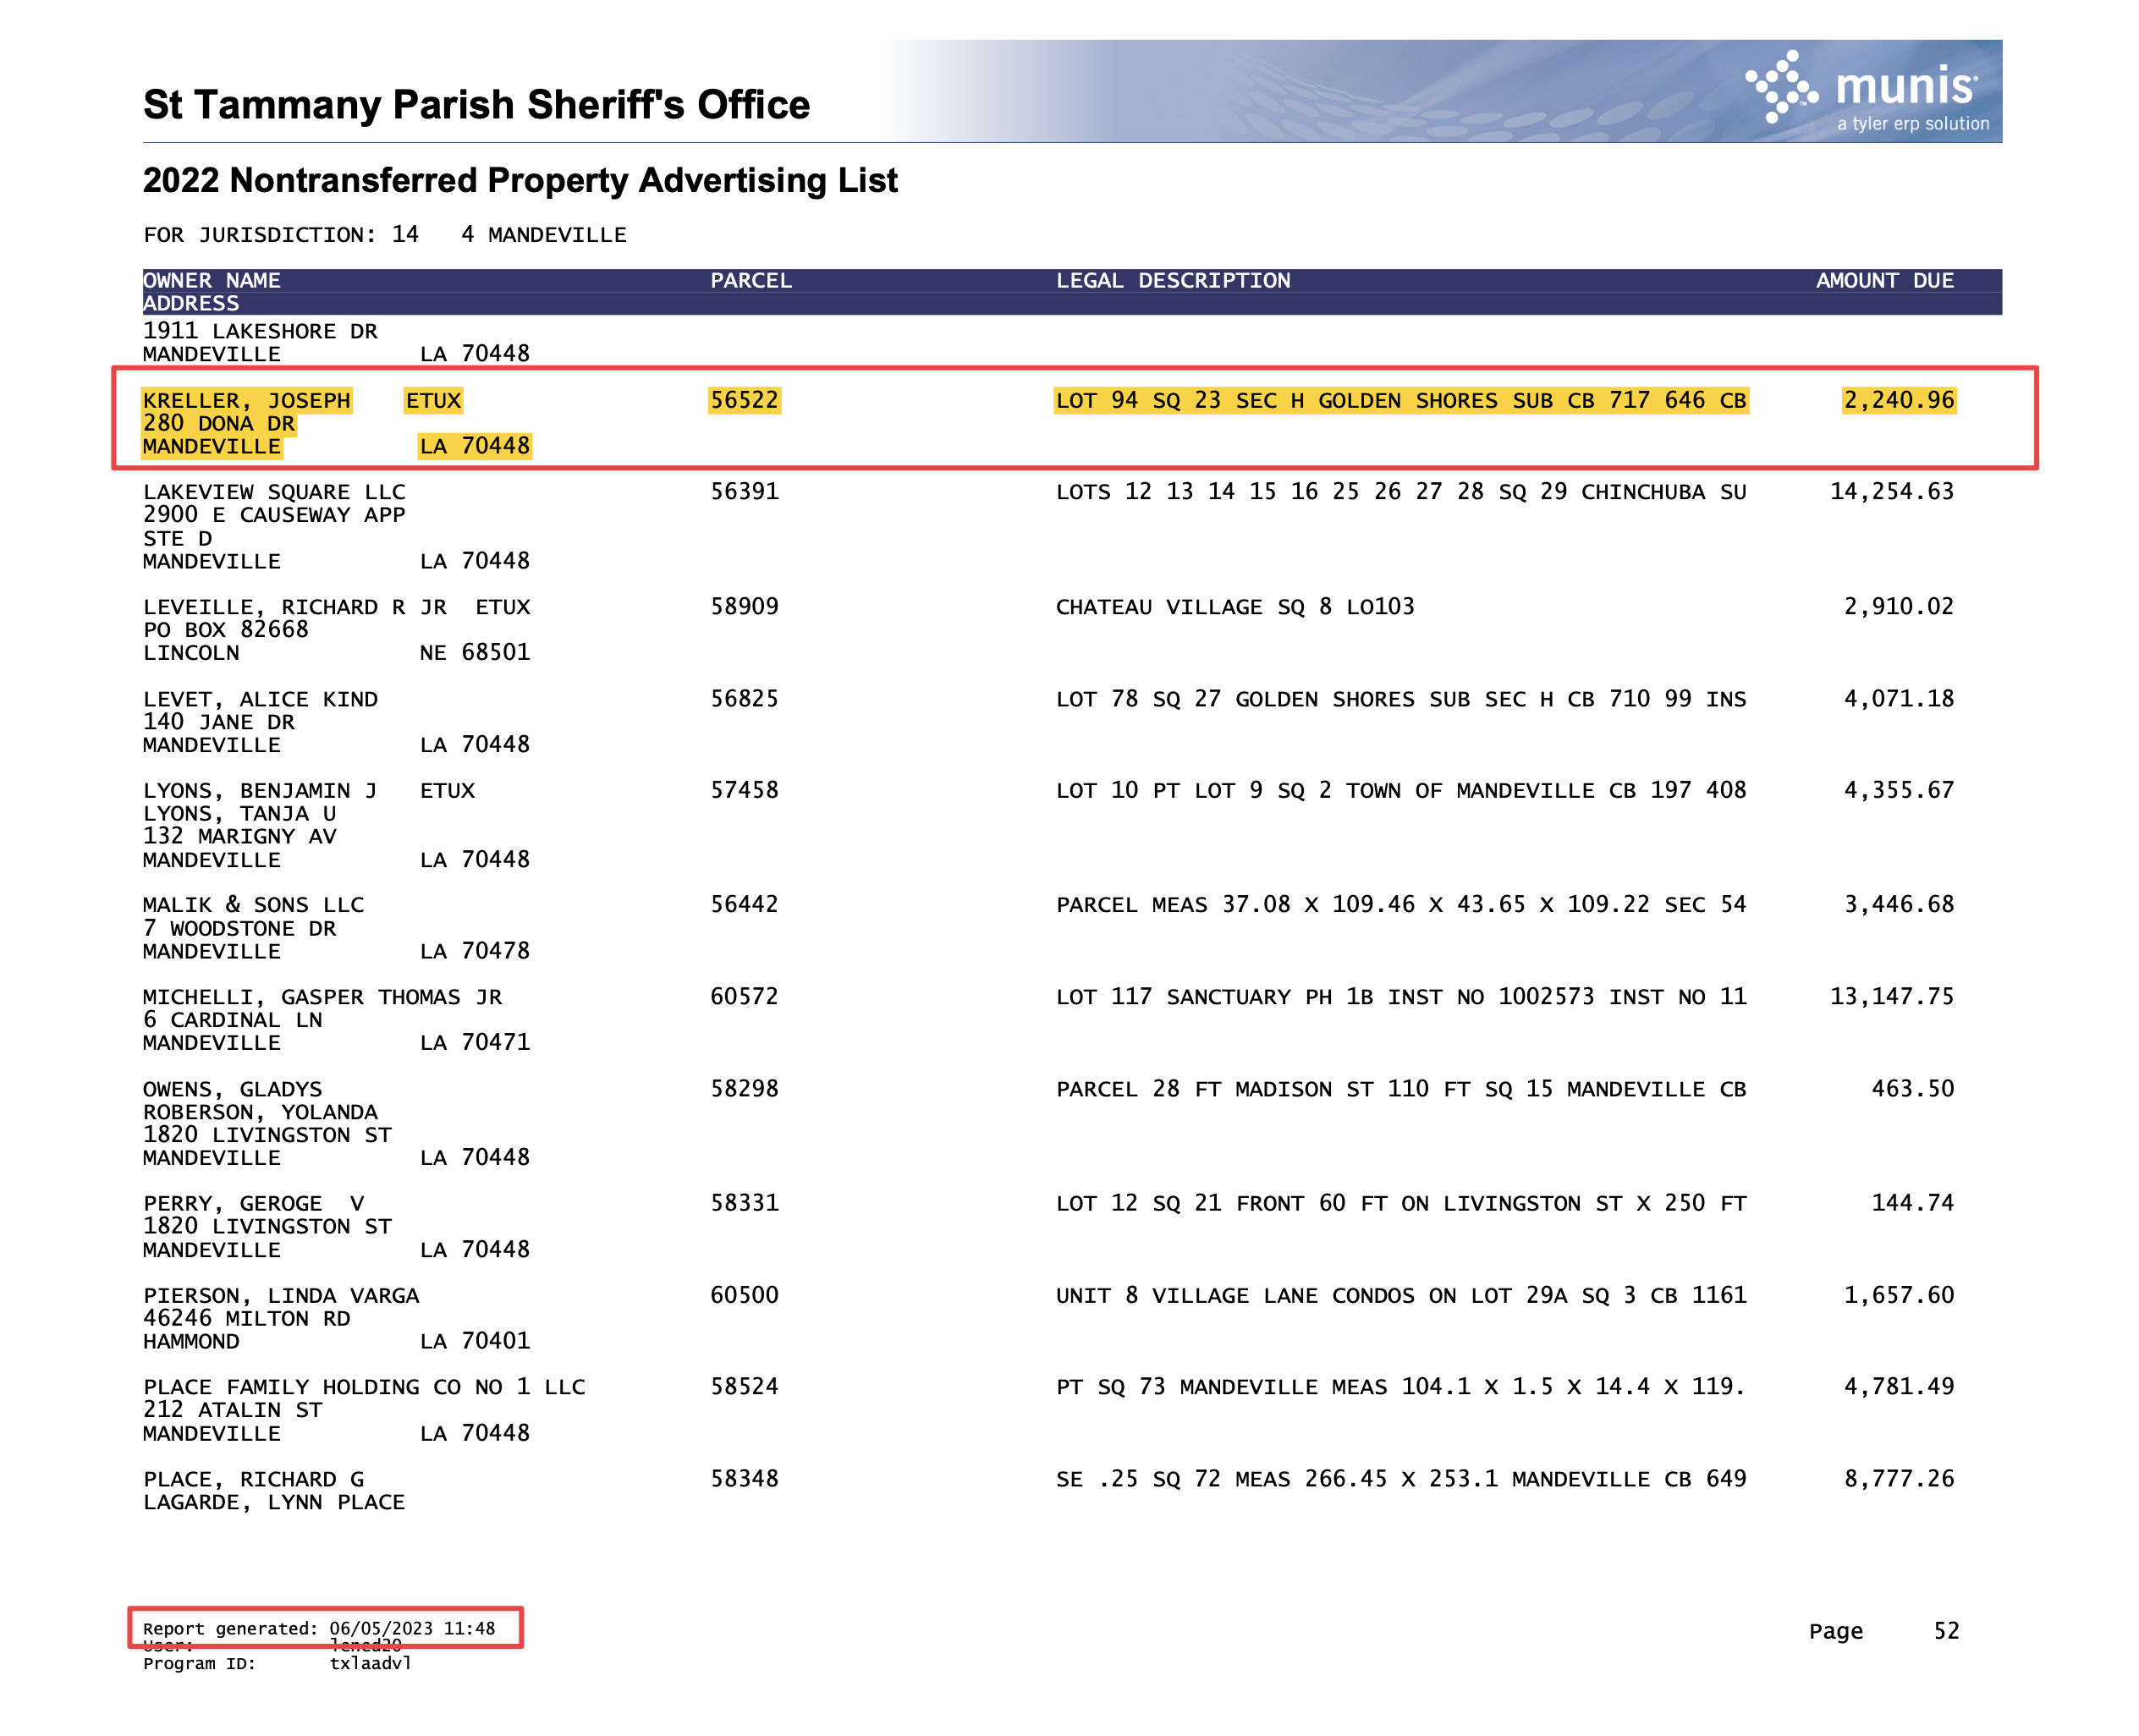 A screen capture of page 52 of the St. Tammany Parish Sheriff’s Office delinquent tax listing from June 7, 2023.